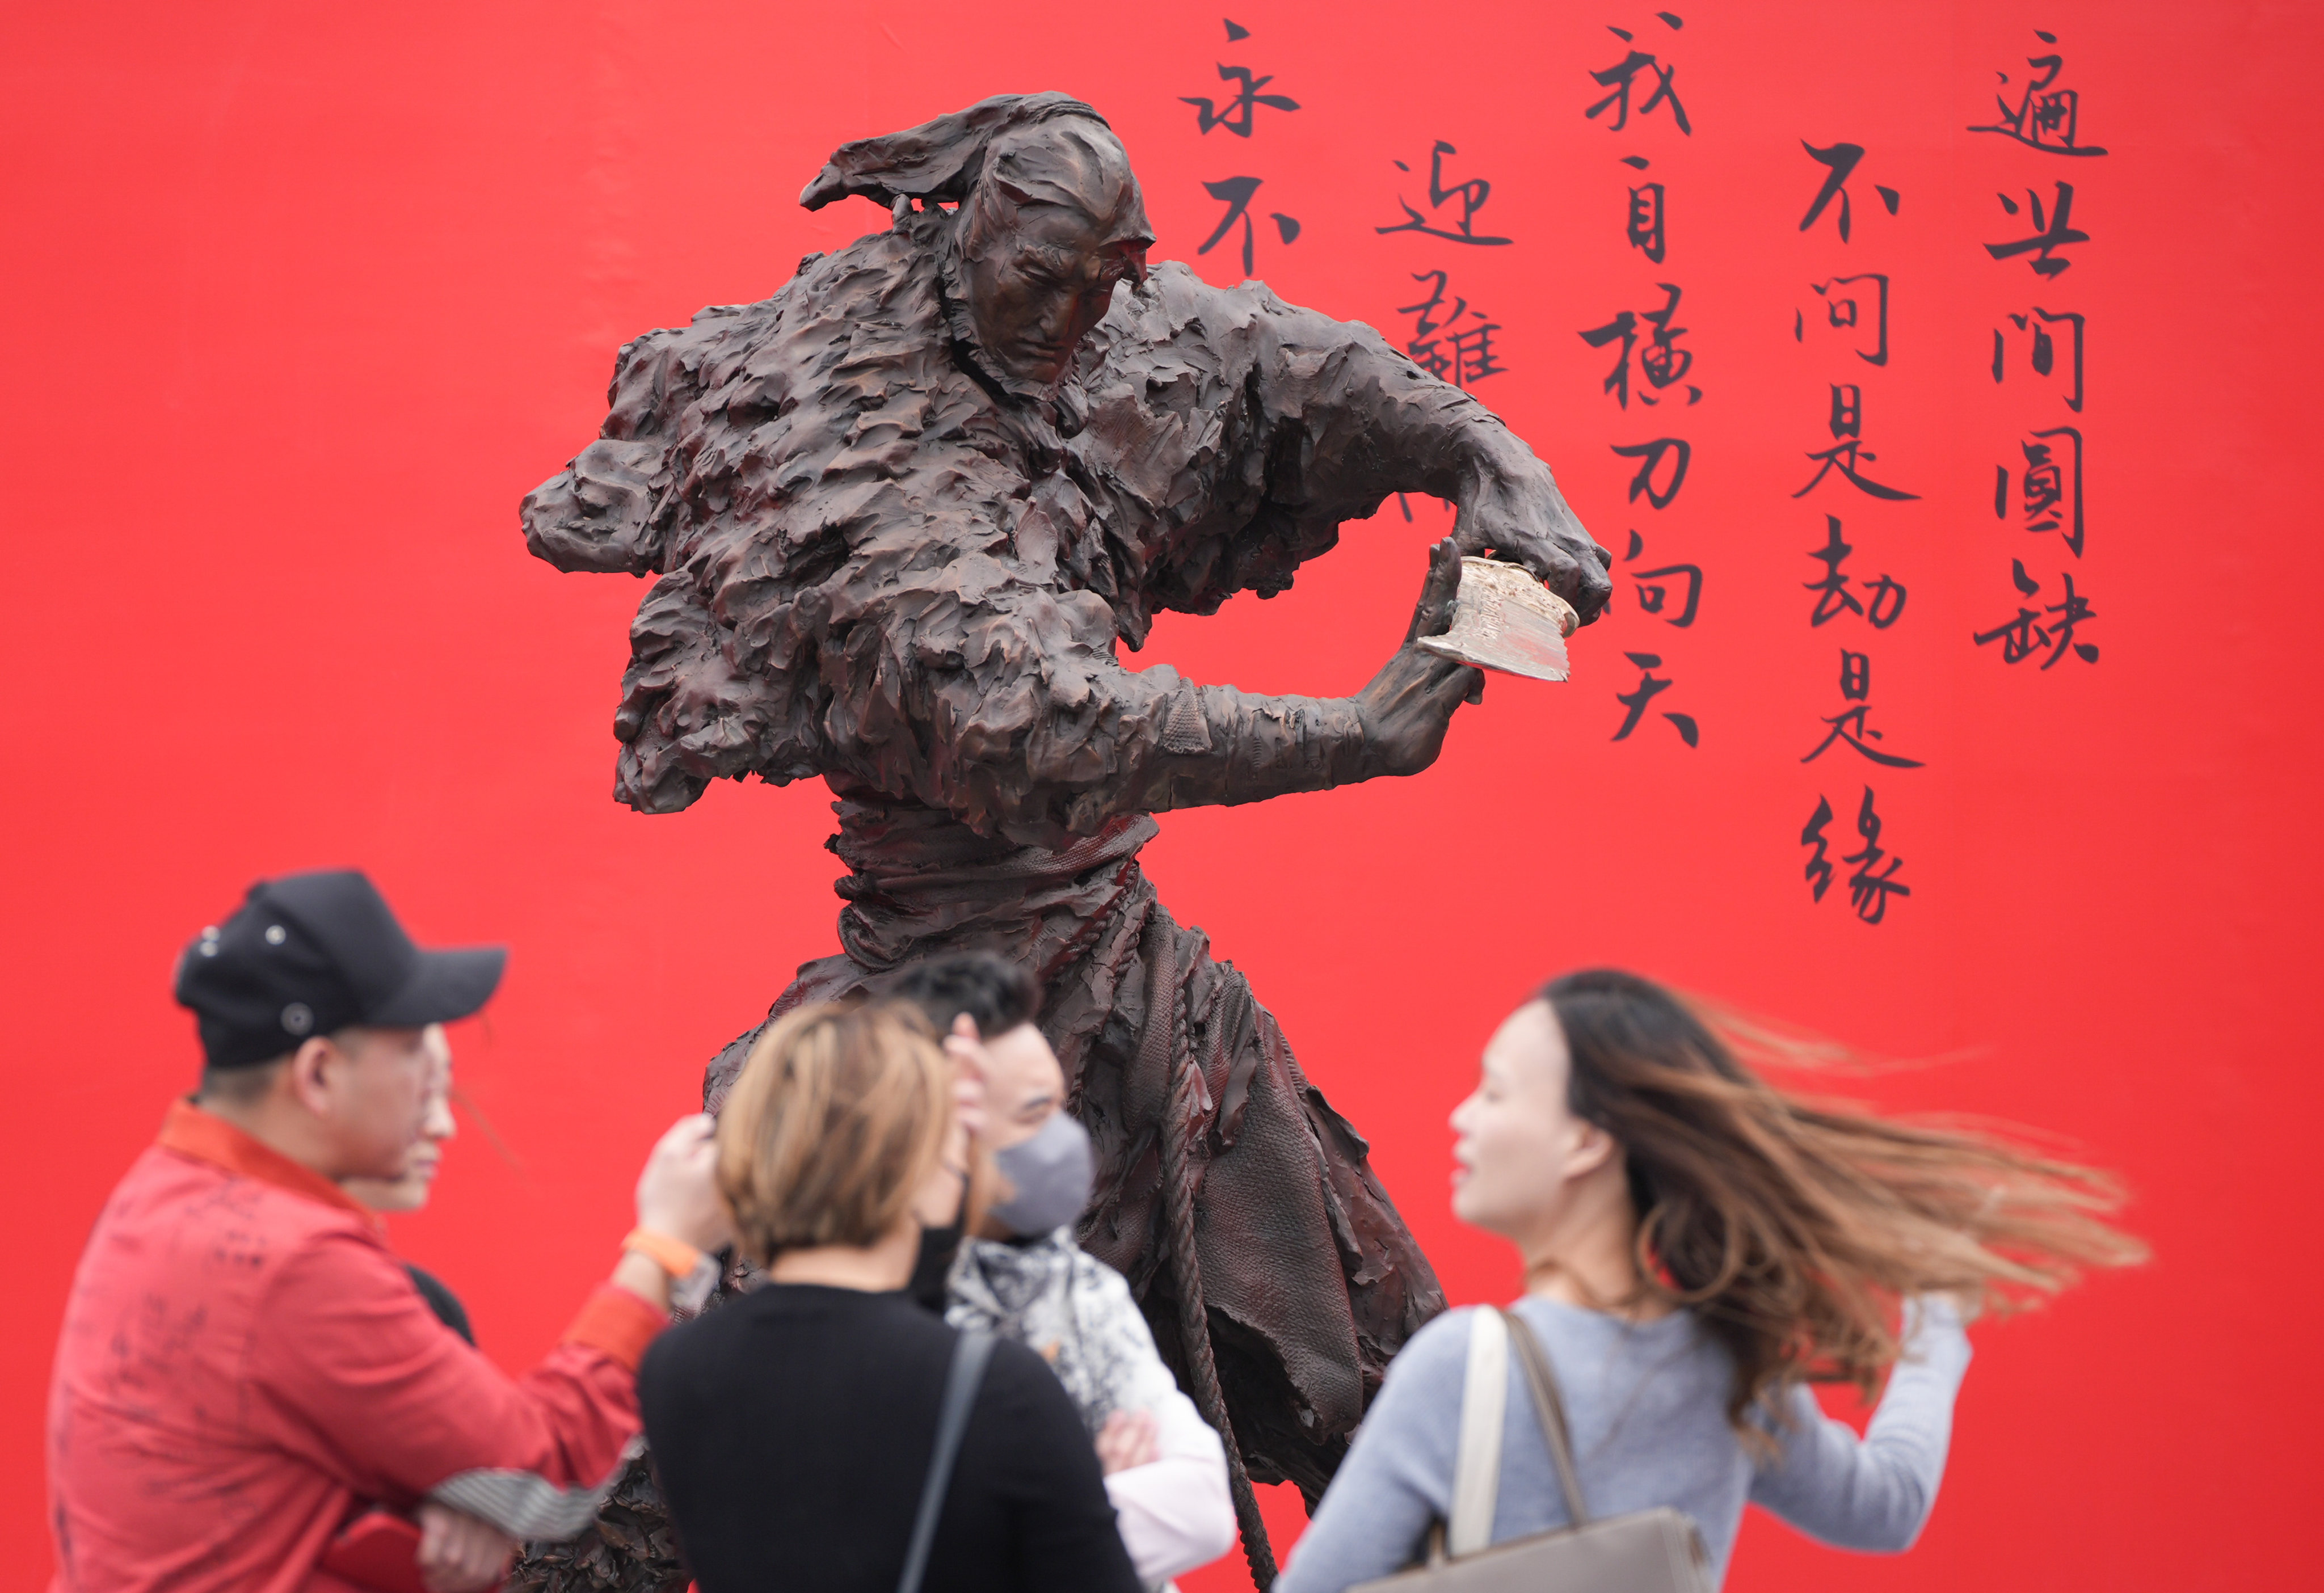 A sculpture in one of the Jin Yong exhibitions. Authorities will also put on a number of other events to celebrate the centenary of the famous novelist’s birth. Photo: Eugene Lee